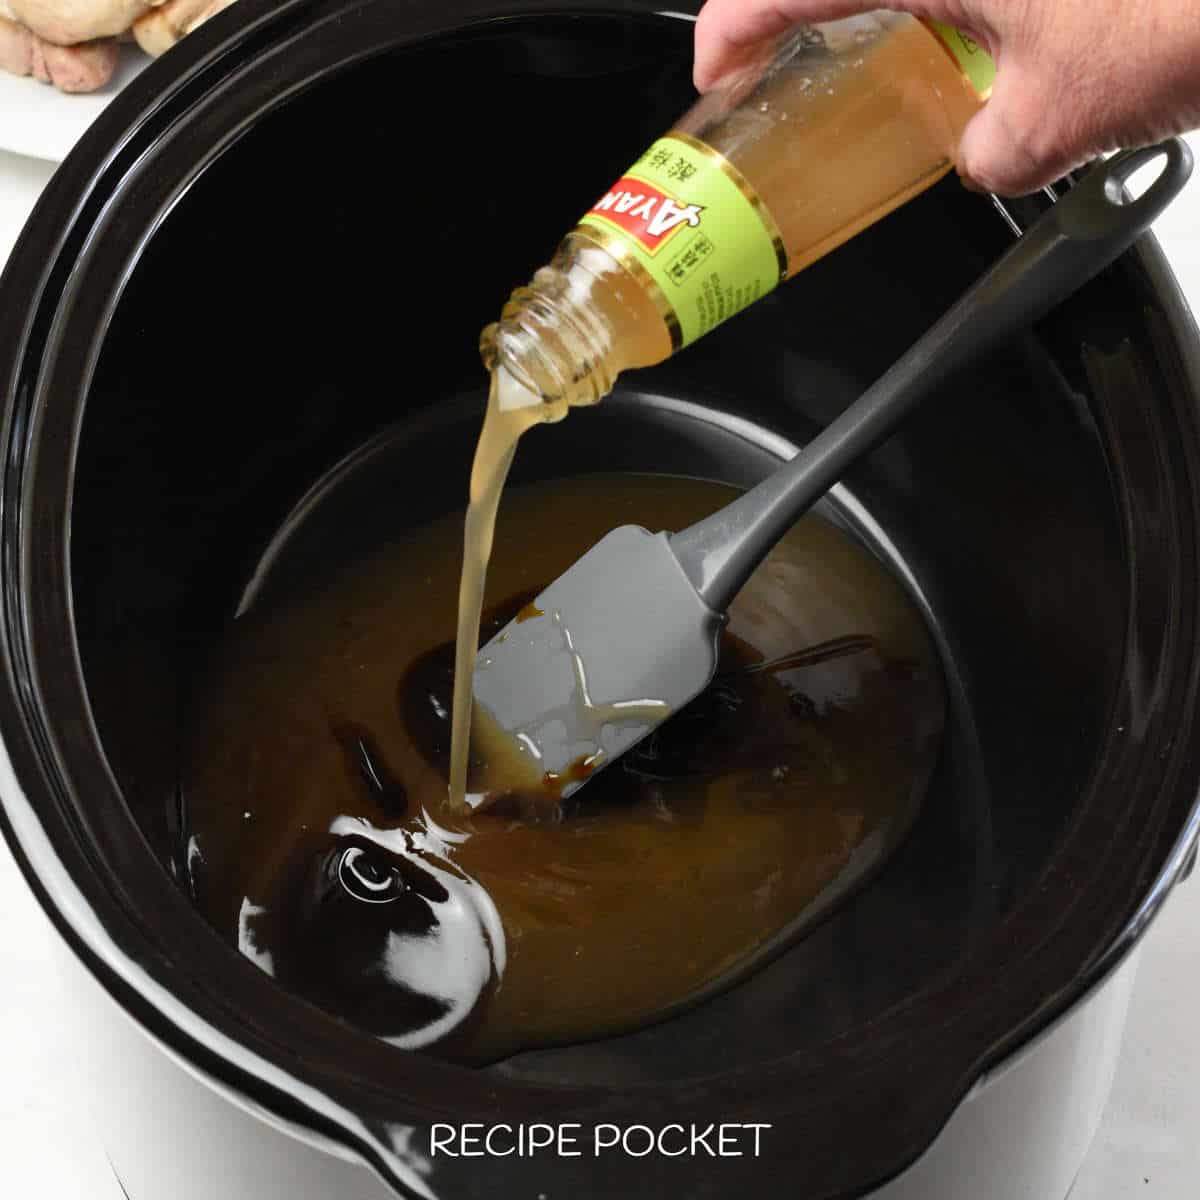 Sauce being poured into a slow cooker.